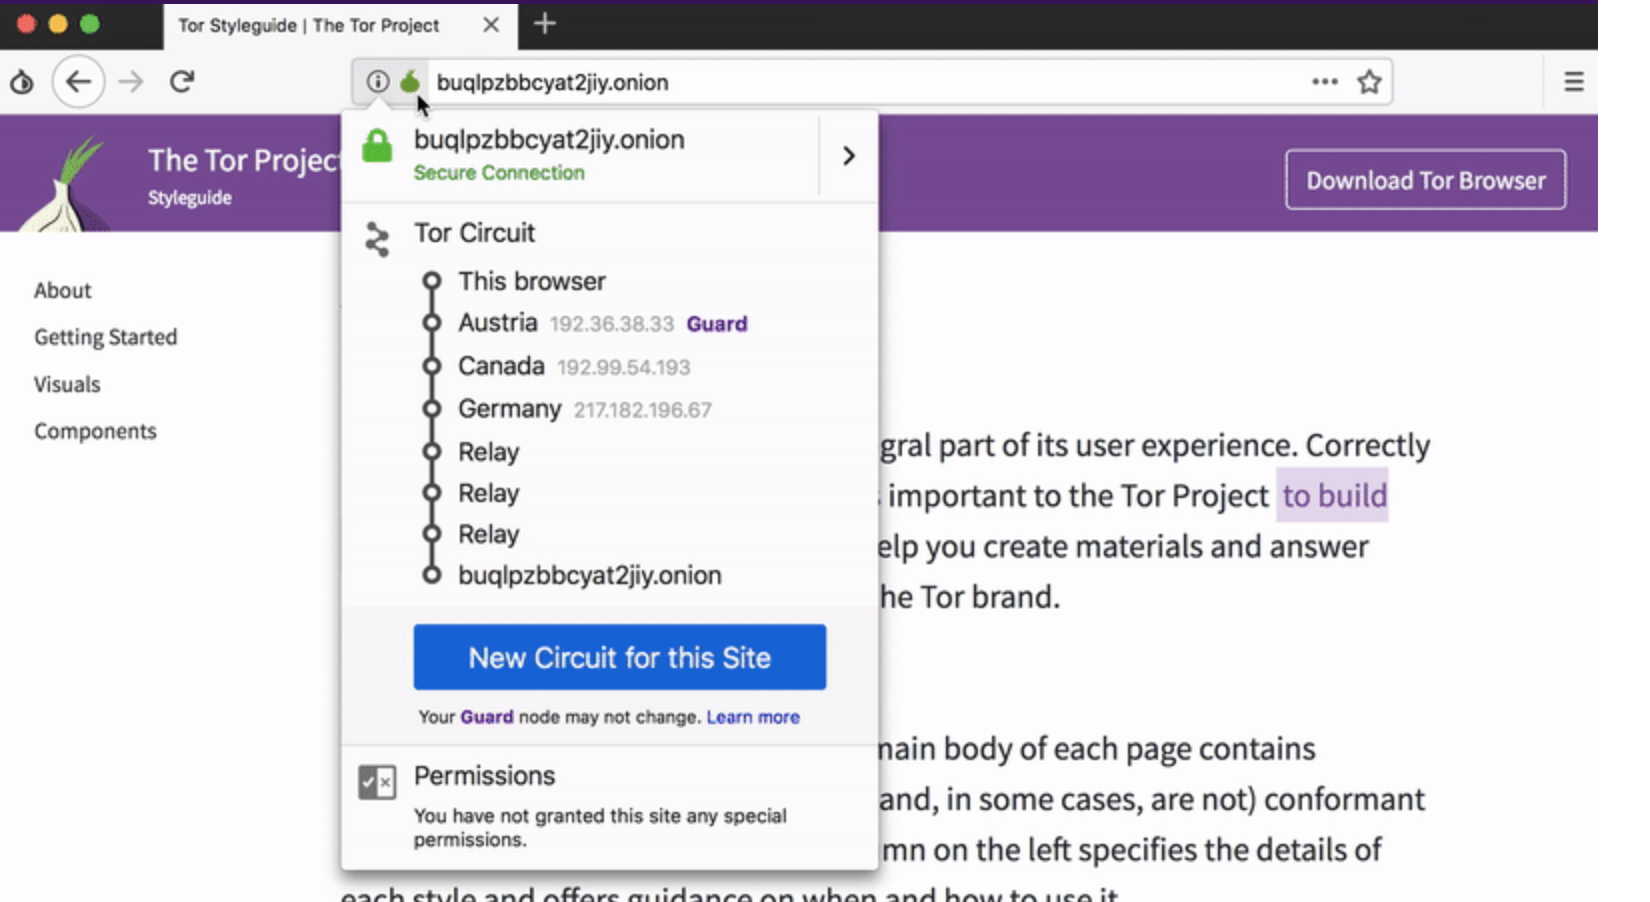 Deep Web Roundup: New Tor Search Engine and Browser, Same Old War on Drugs